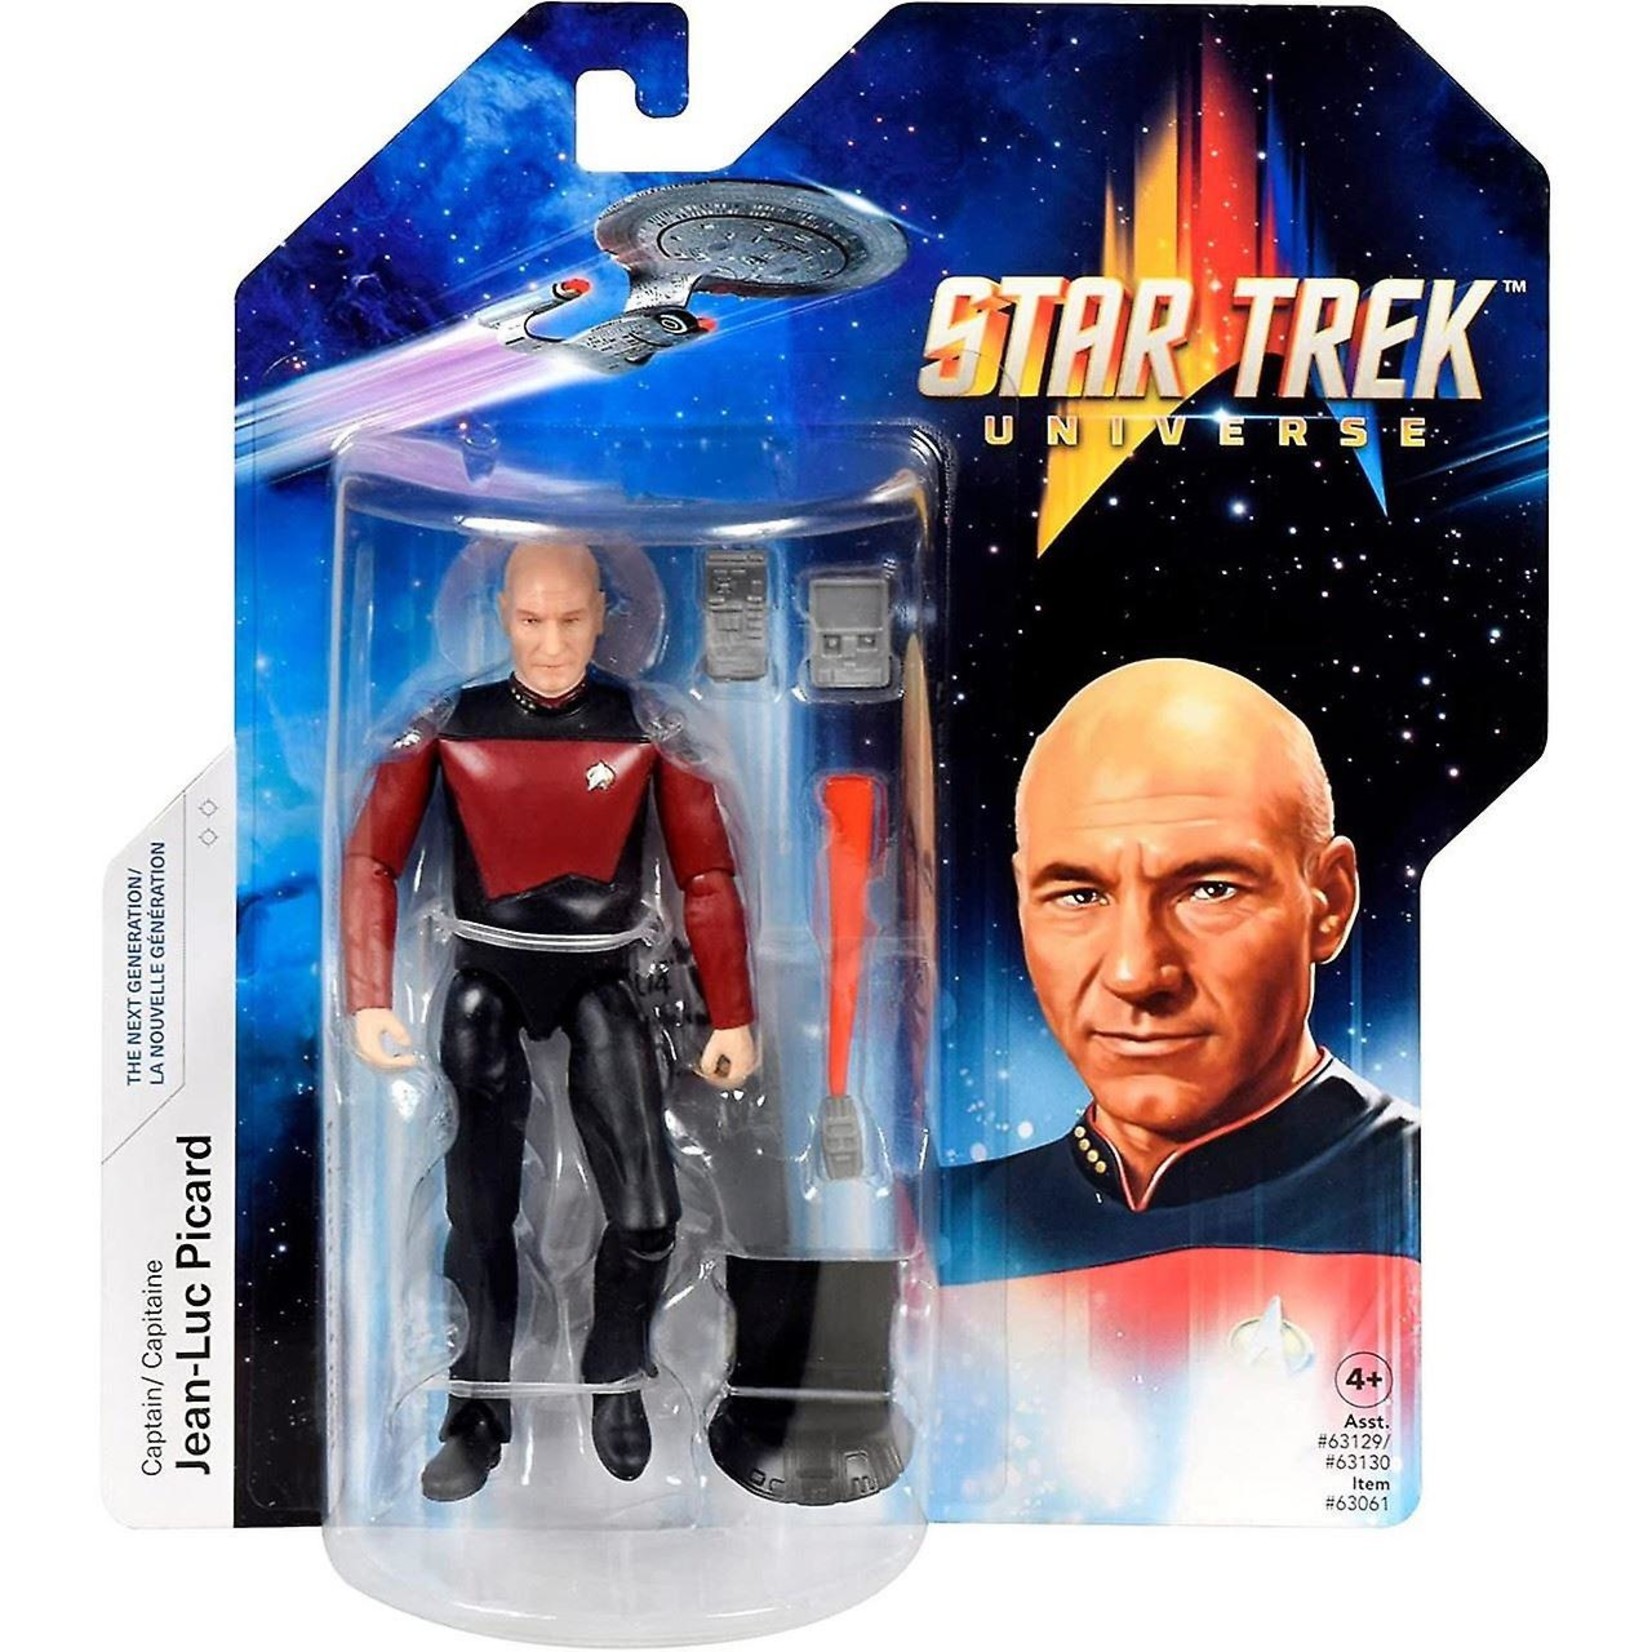 Playmates Toys Playmates Toys Star Trek The Next Generation Jean-Luc Picard 5 Inch Action Figure